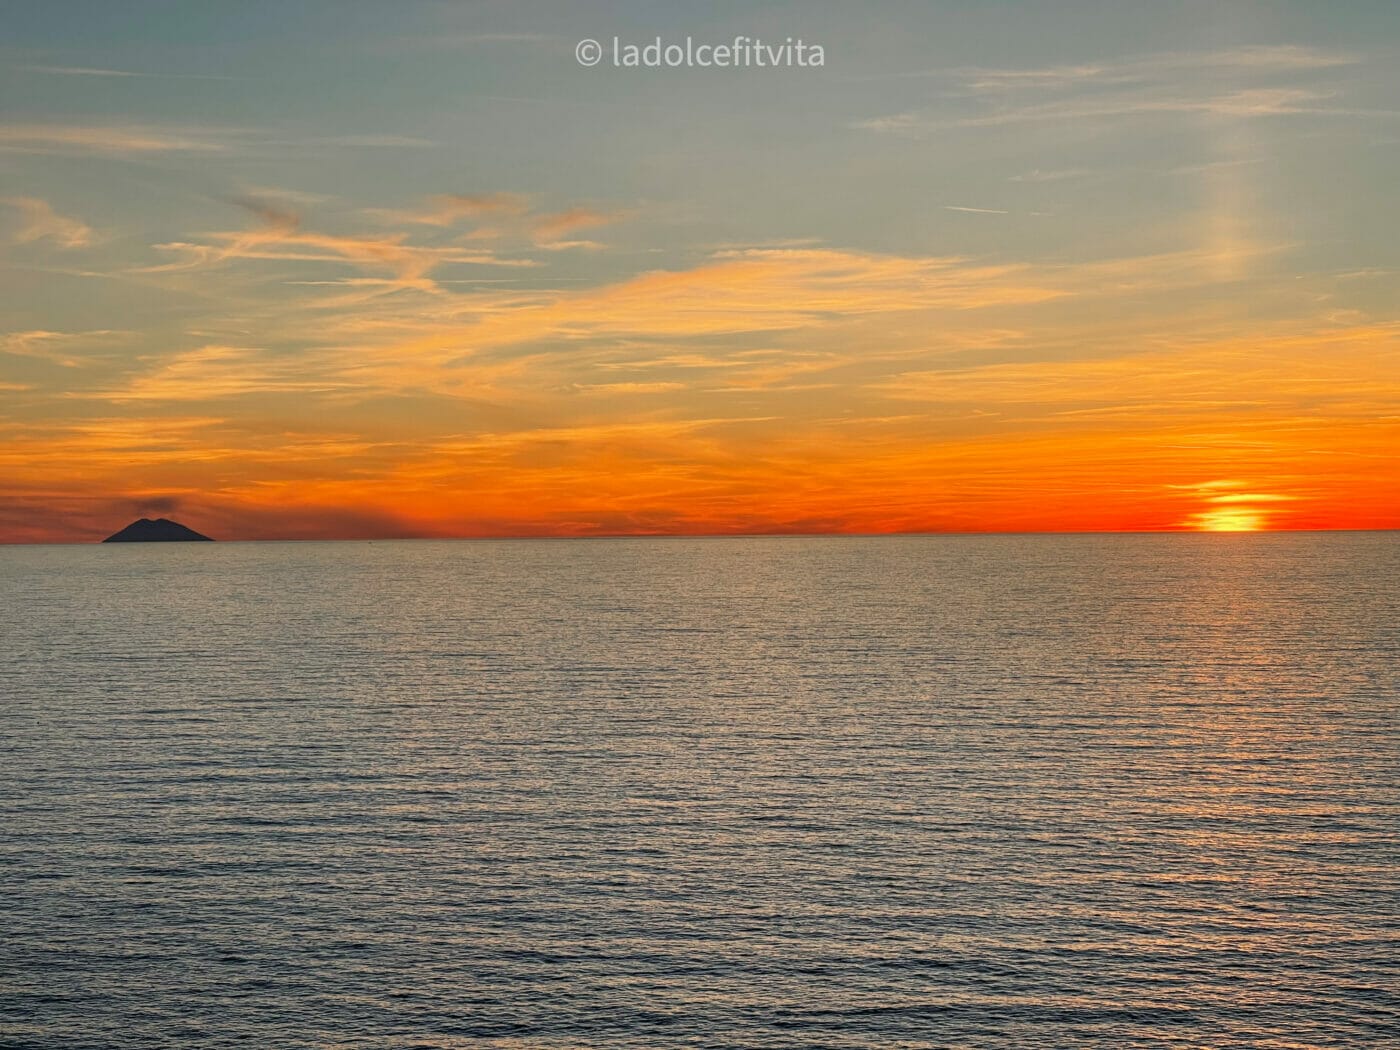 bright orange sunset with stromboli island on the horizon as seen from a terrace in Pizzo Italy